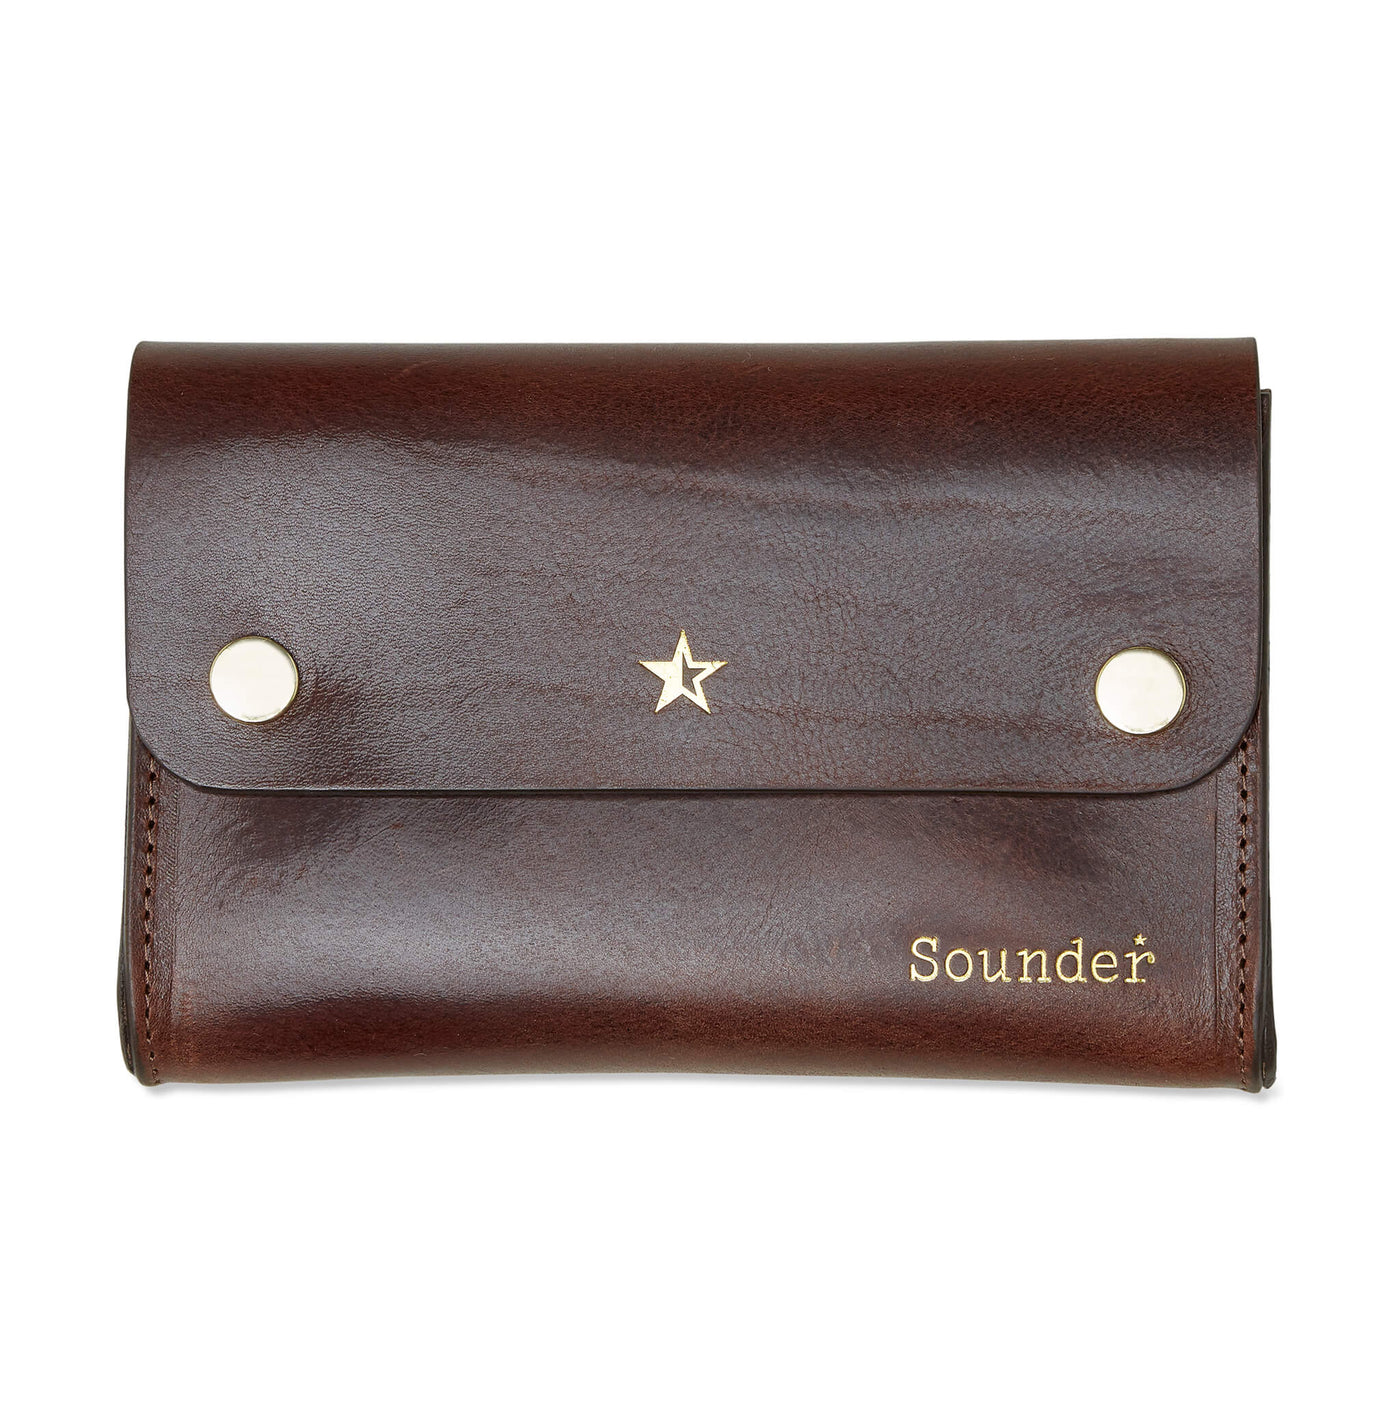 Tidy Leather Pouch - Dark Tan